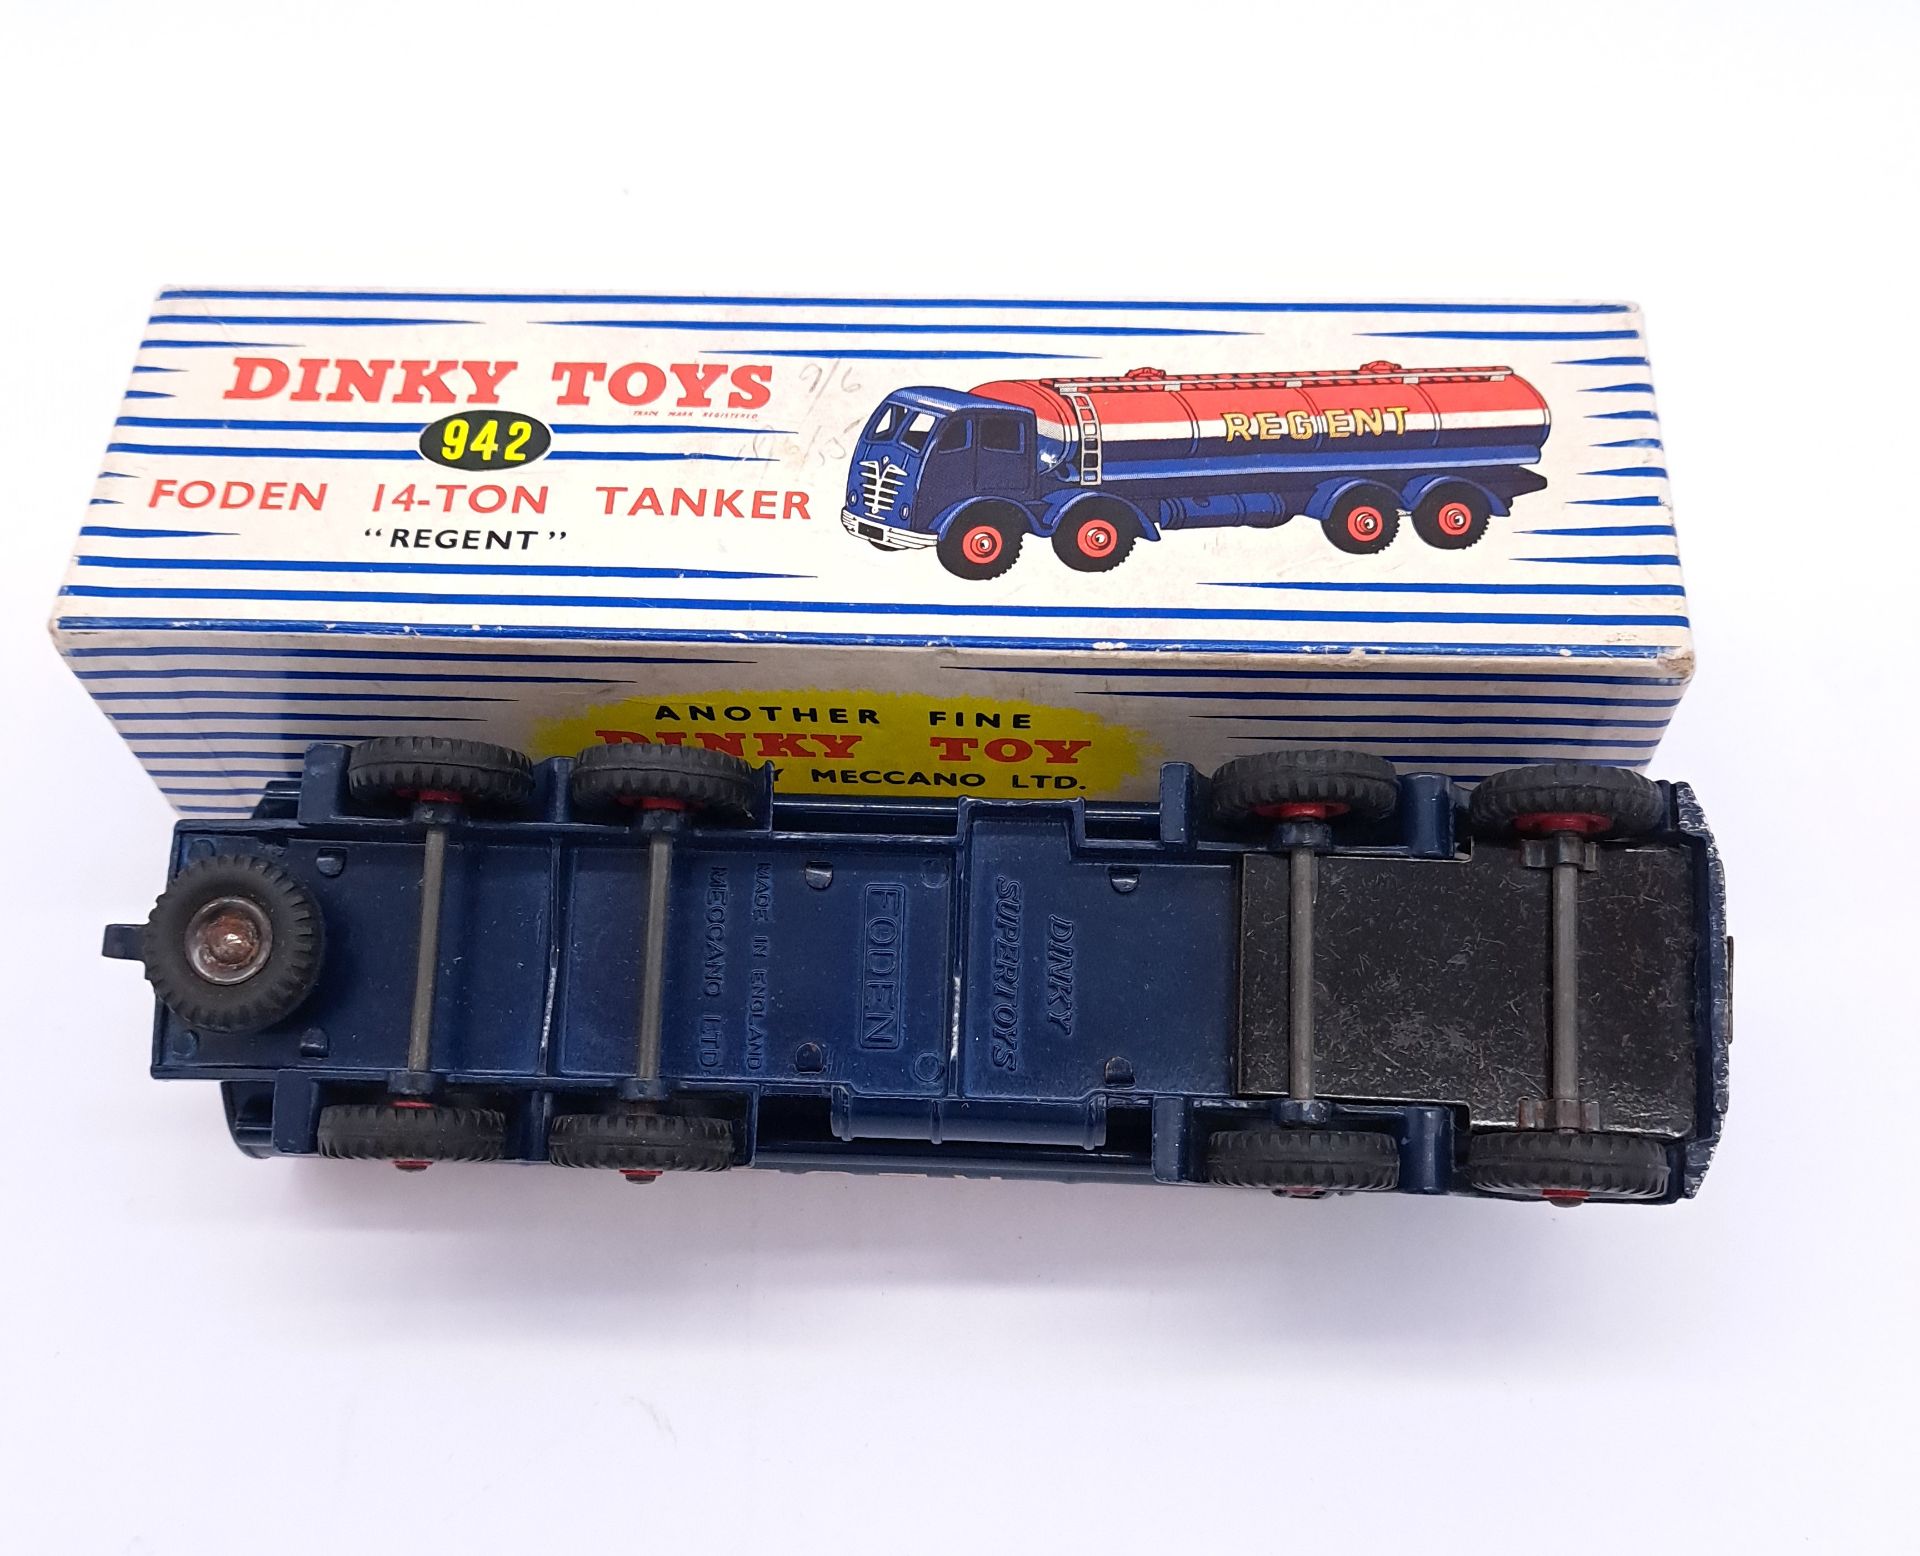 Dinky 942 Foden (2nd type) 14-ton "Regent" Tanker - Image 6 of 8